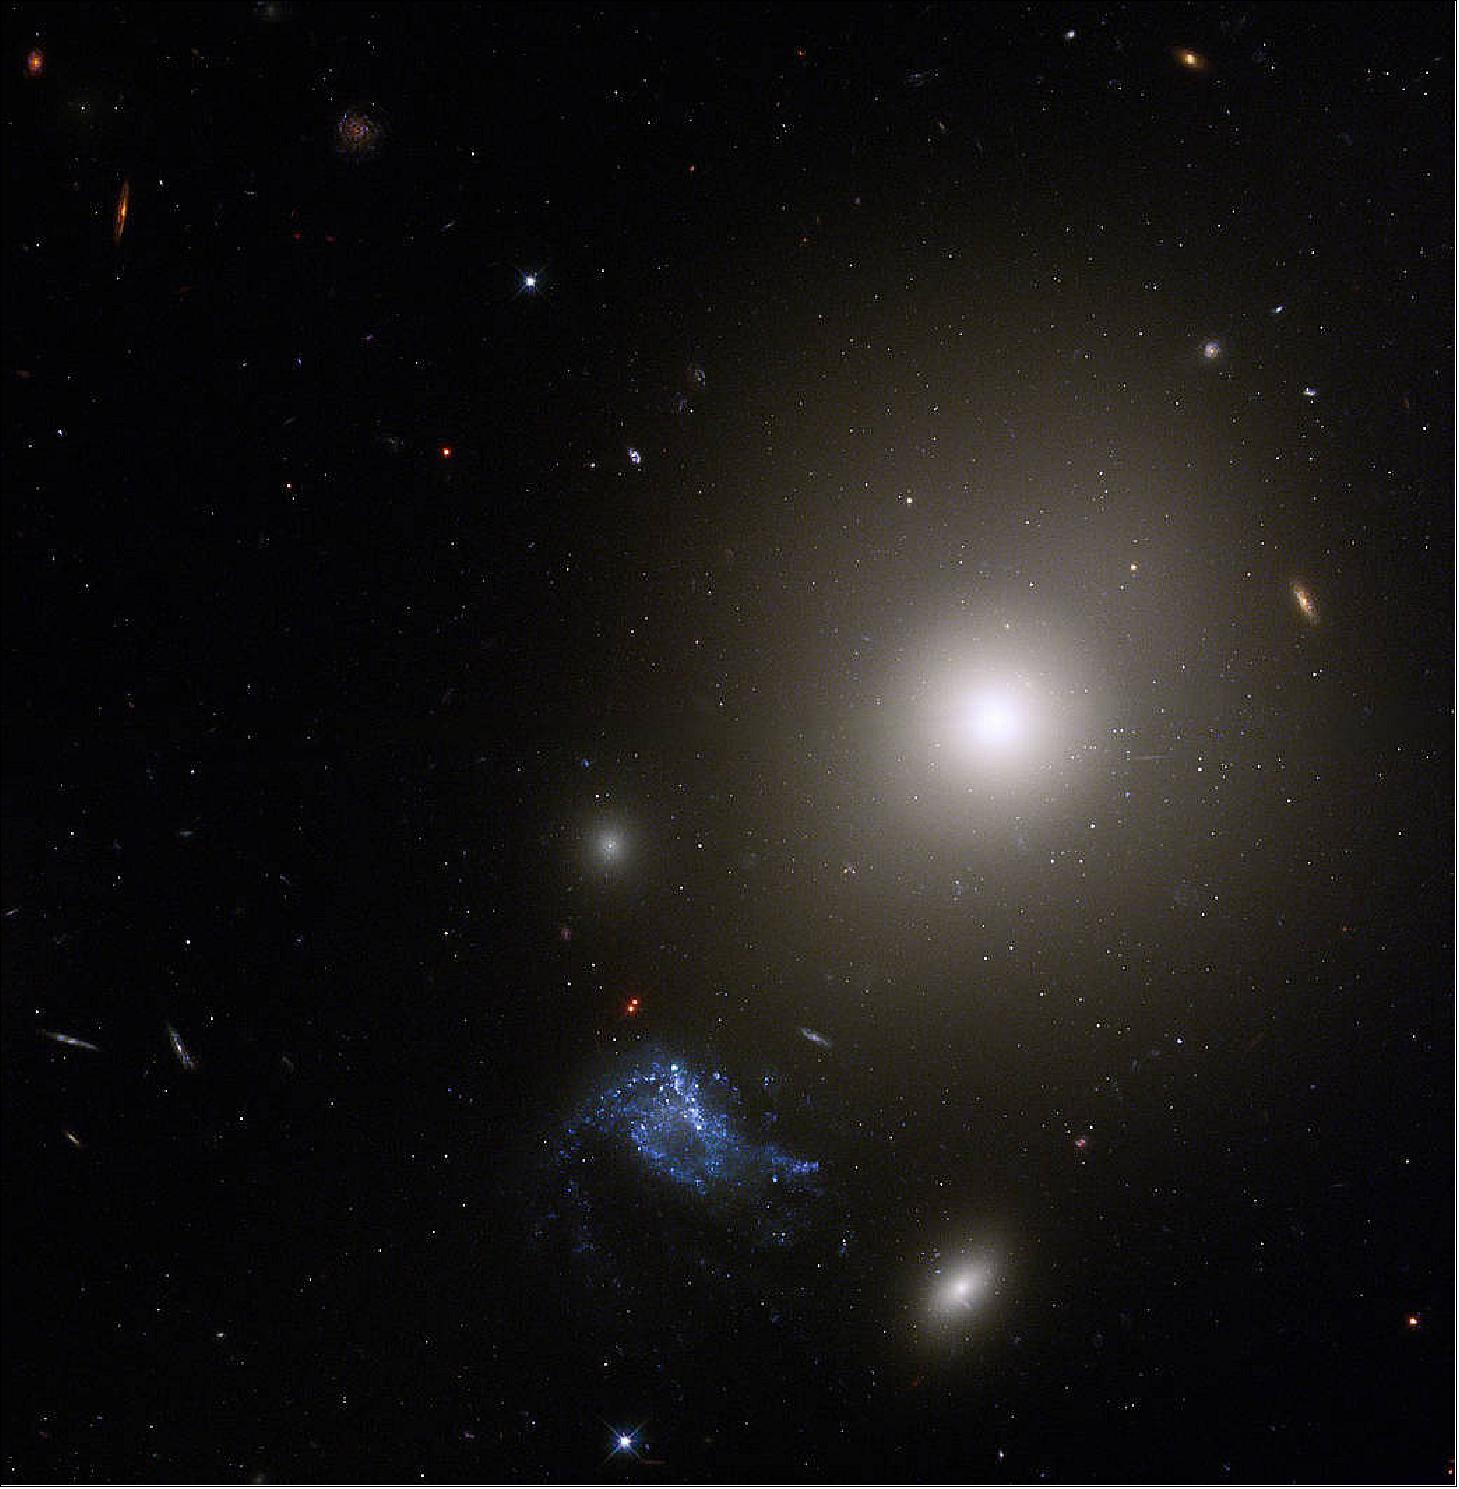 Figure 33: Hubble observed Minkowski’s Object and NGC 541 to get a better sense of how star formation occurs in this region, what kind of star formation takes place, and the properties of the jet that triggers it [image credit: NASA, ESA, and S. Croft (Eureka Scientific Inc.); Image Processing: Gladys Kober (NASA Goddard/Catholic University of America)]